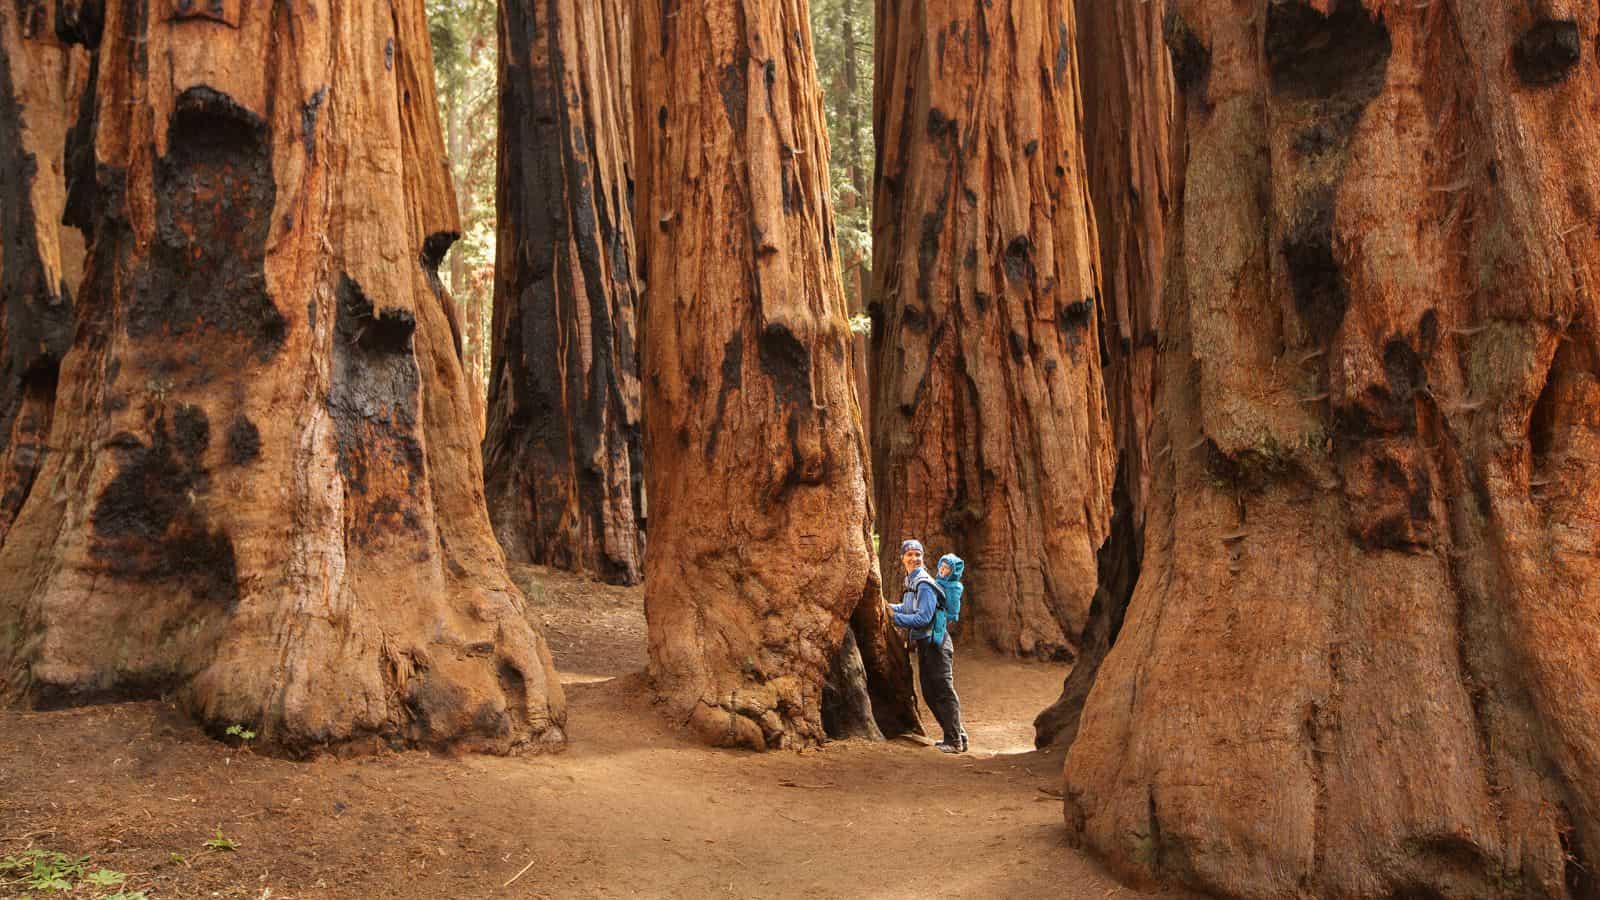 <p>This park in the southern Sierra Nevada Range is famed for its giant sequoia trees, including the General Sherman Tree, the largest on Earth by volume. Driving through the fallen Tunnel Log tree offers visitors a sense of the enormity of these ancient trees.</p>